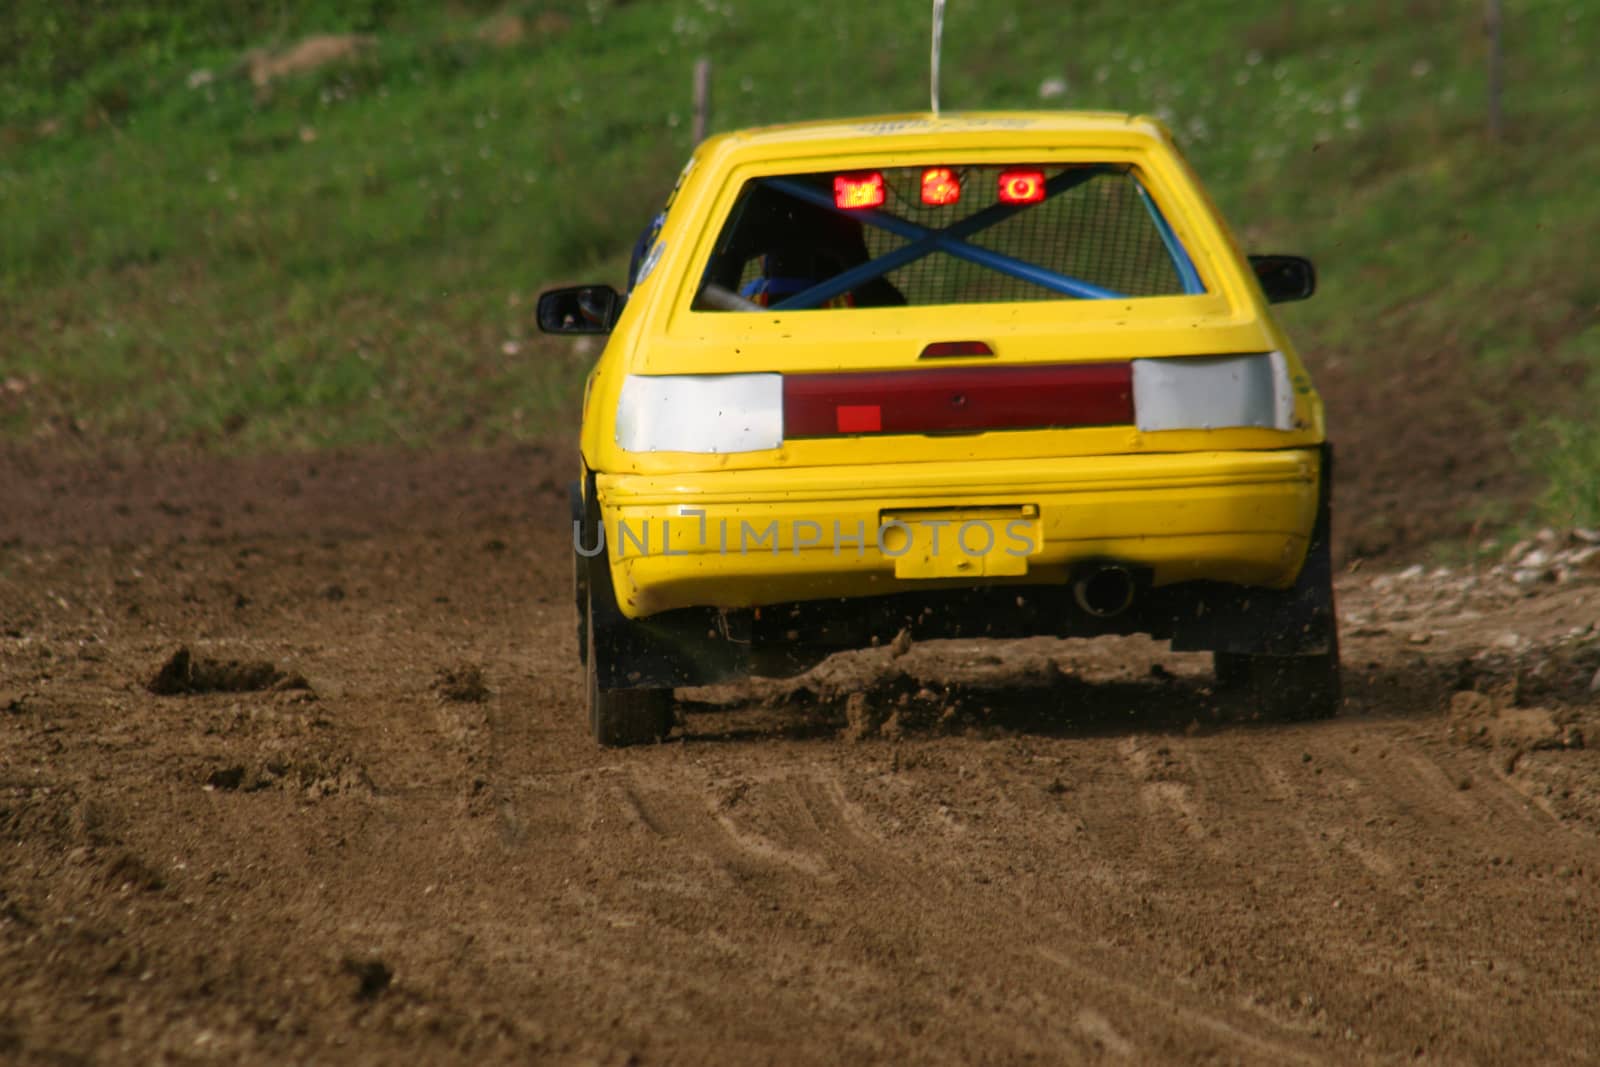 Yellow car on track going fast and throwing dirt in the air